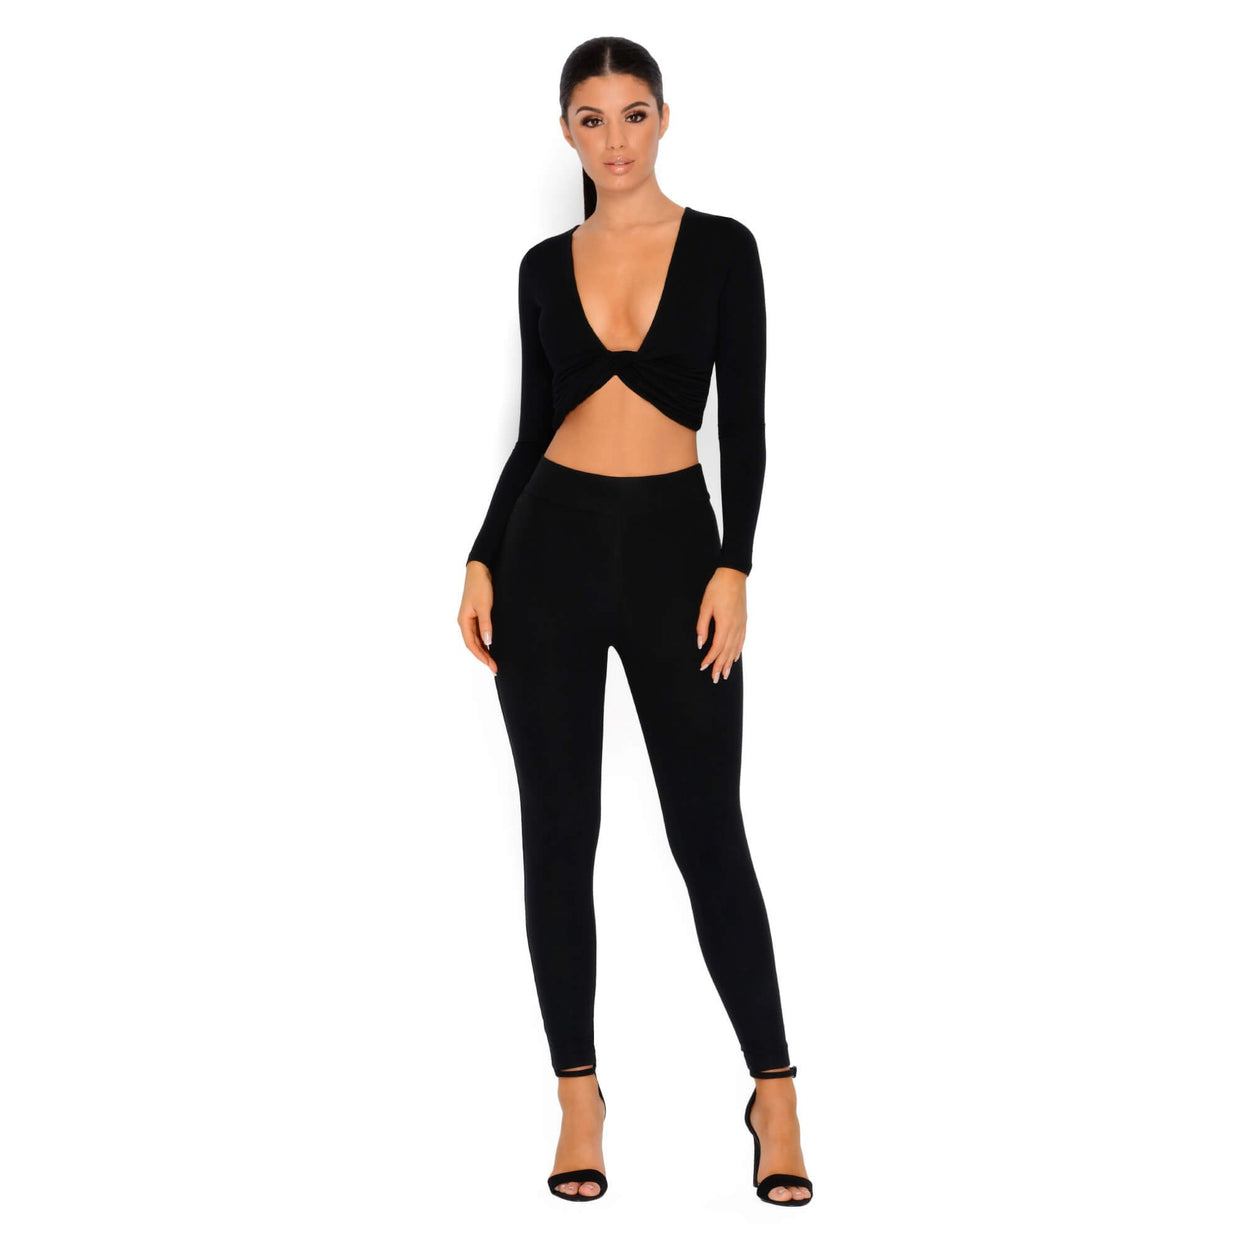 Why Knot Double Layered Crop Top in Black